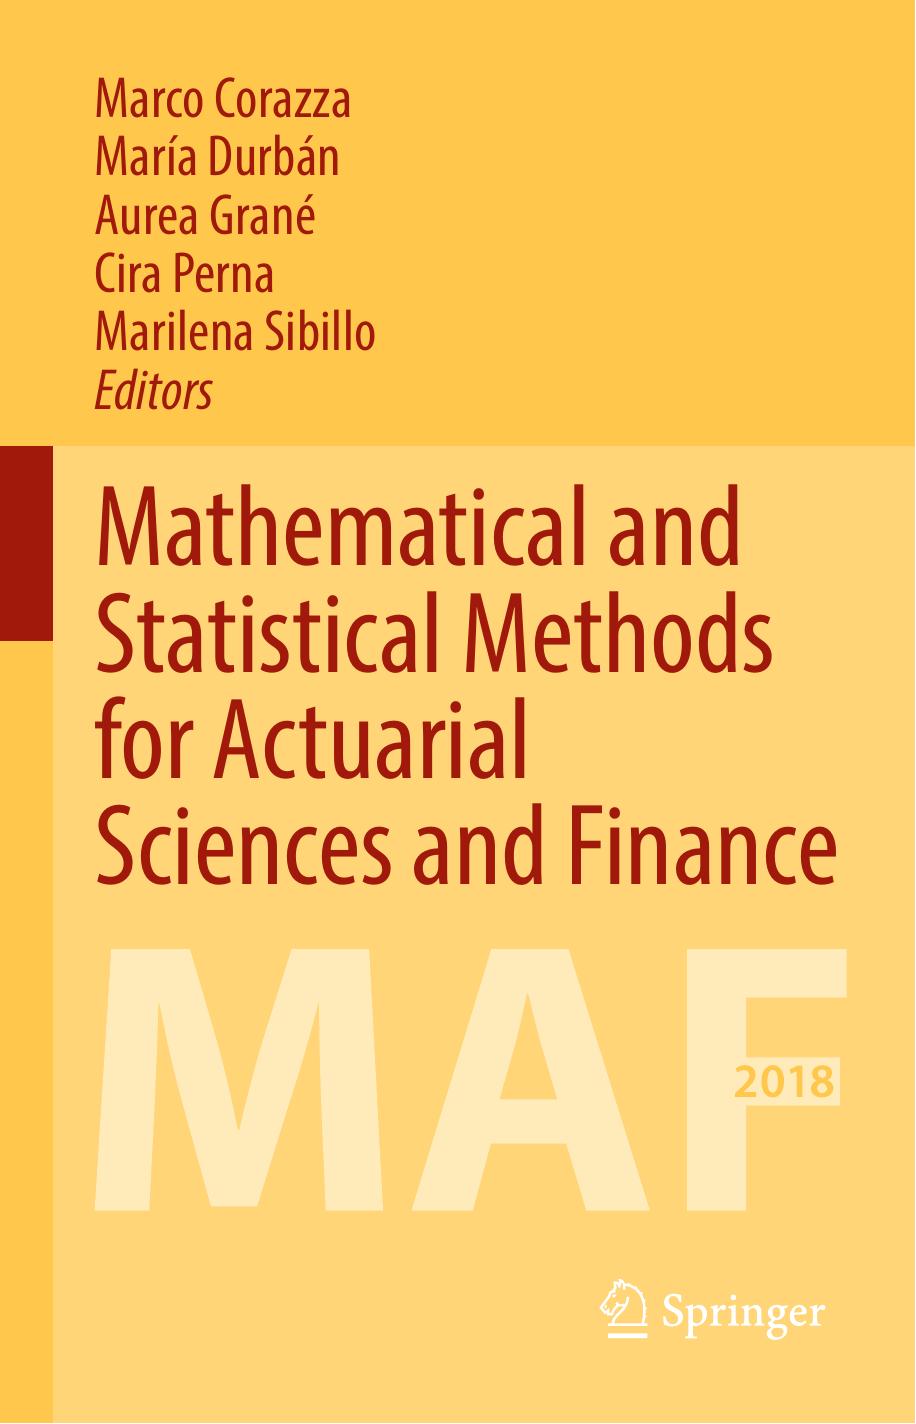 Mathematical and Statistical Methods for Actuarial Sciences and Finance 2018.pdf